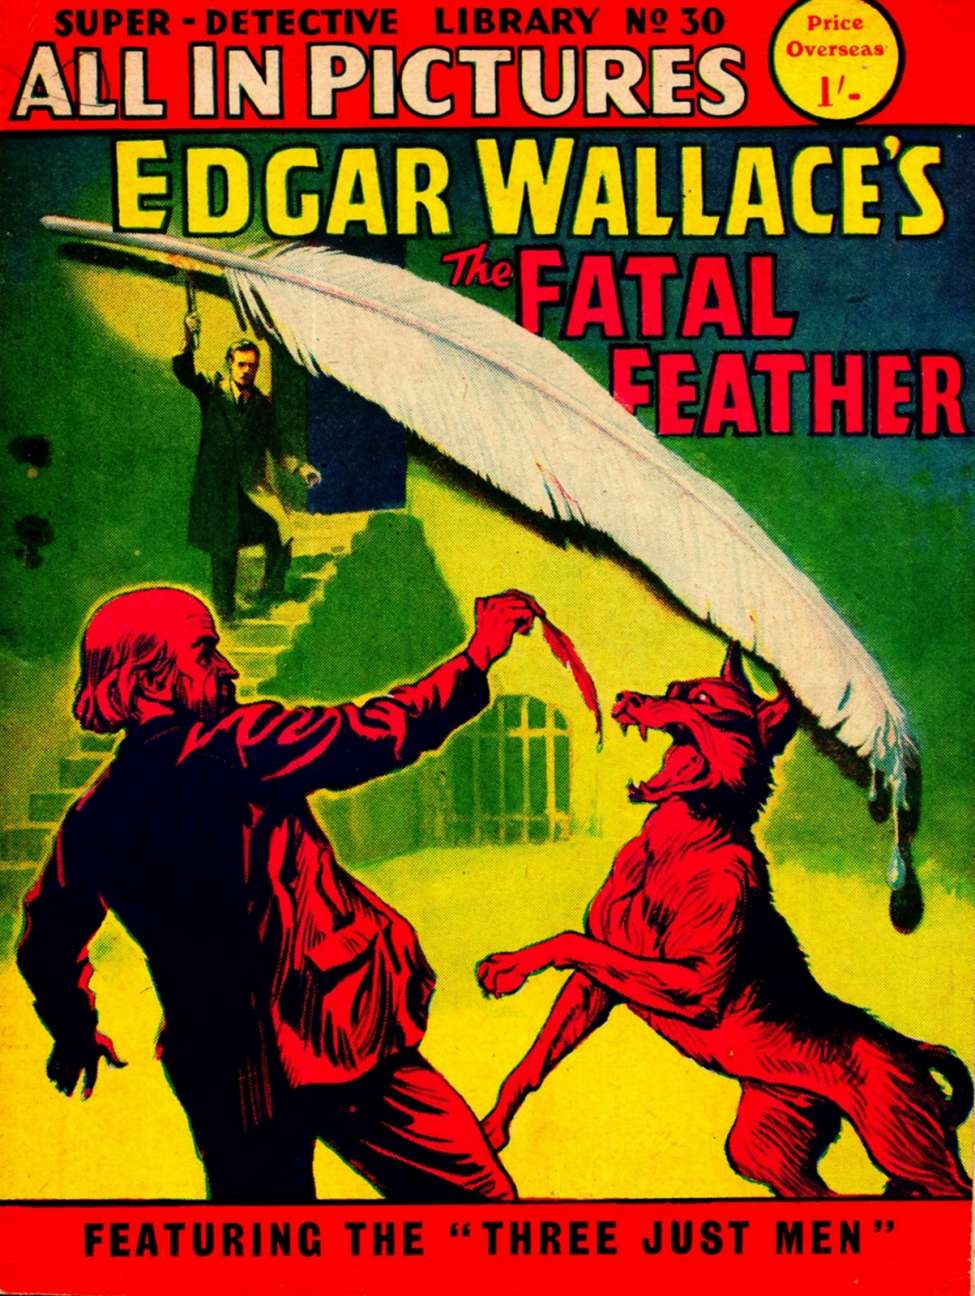 Book Cover For Super Detective Library 30 - Edgar Wallace's The Fatal Feather